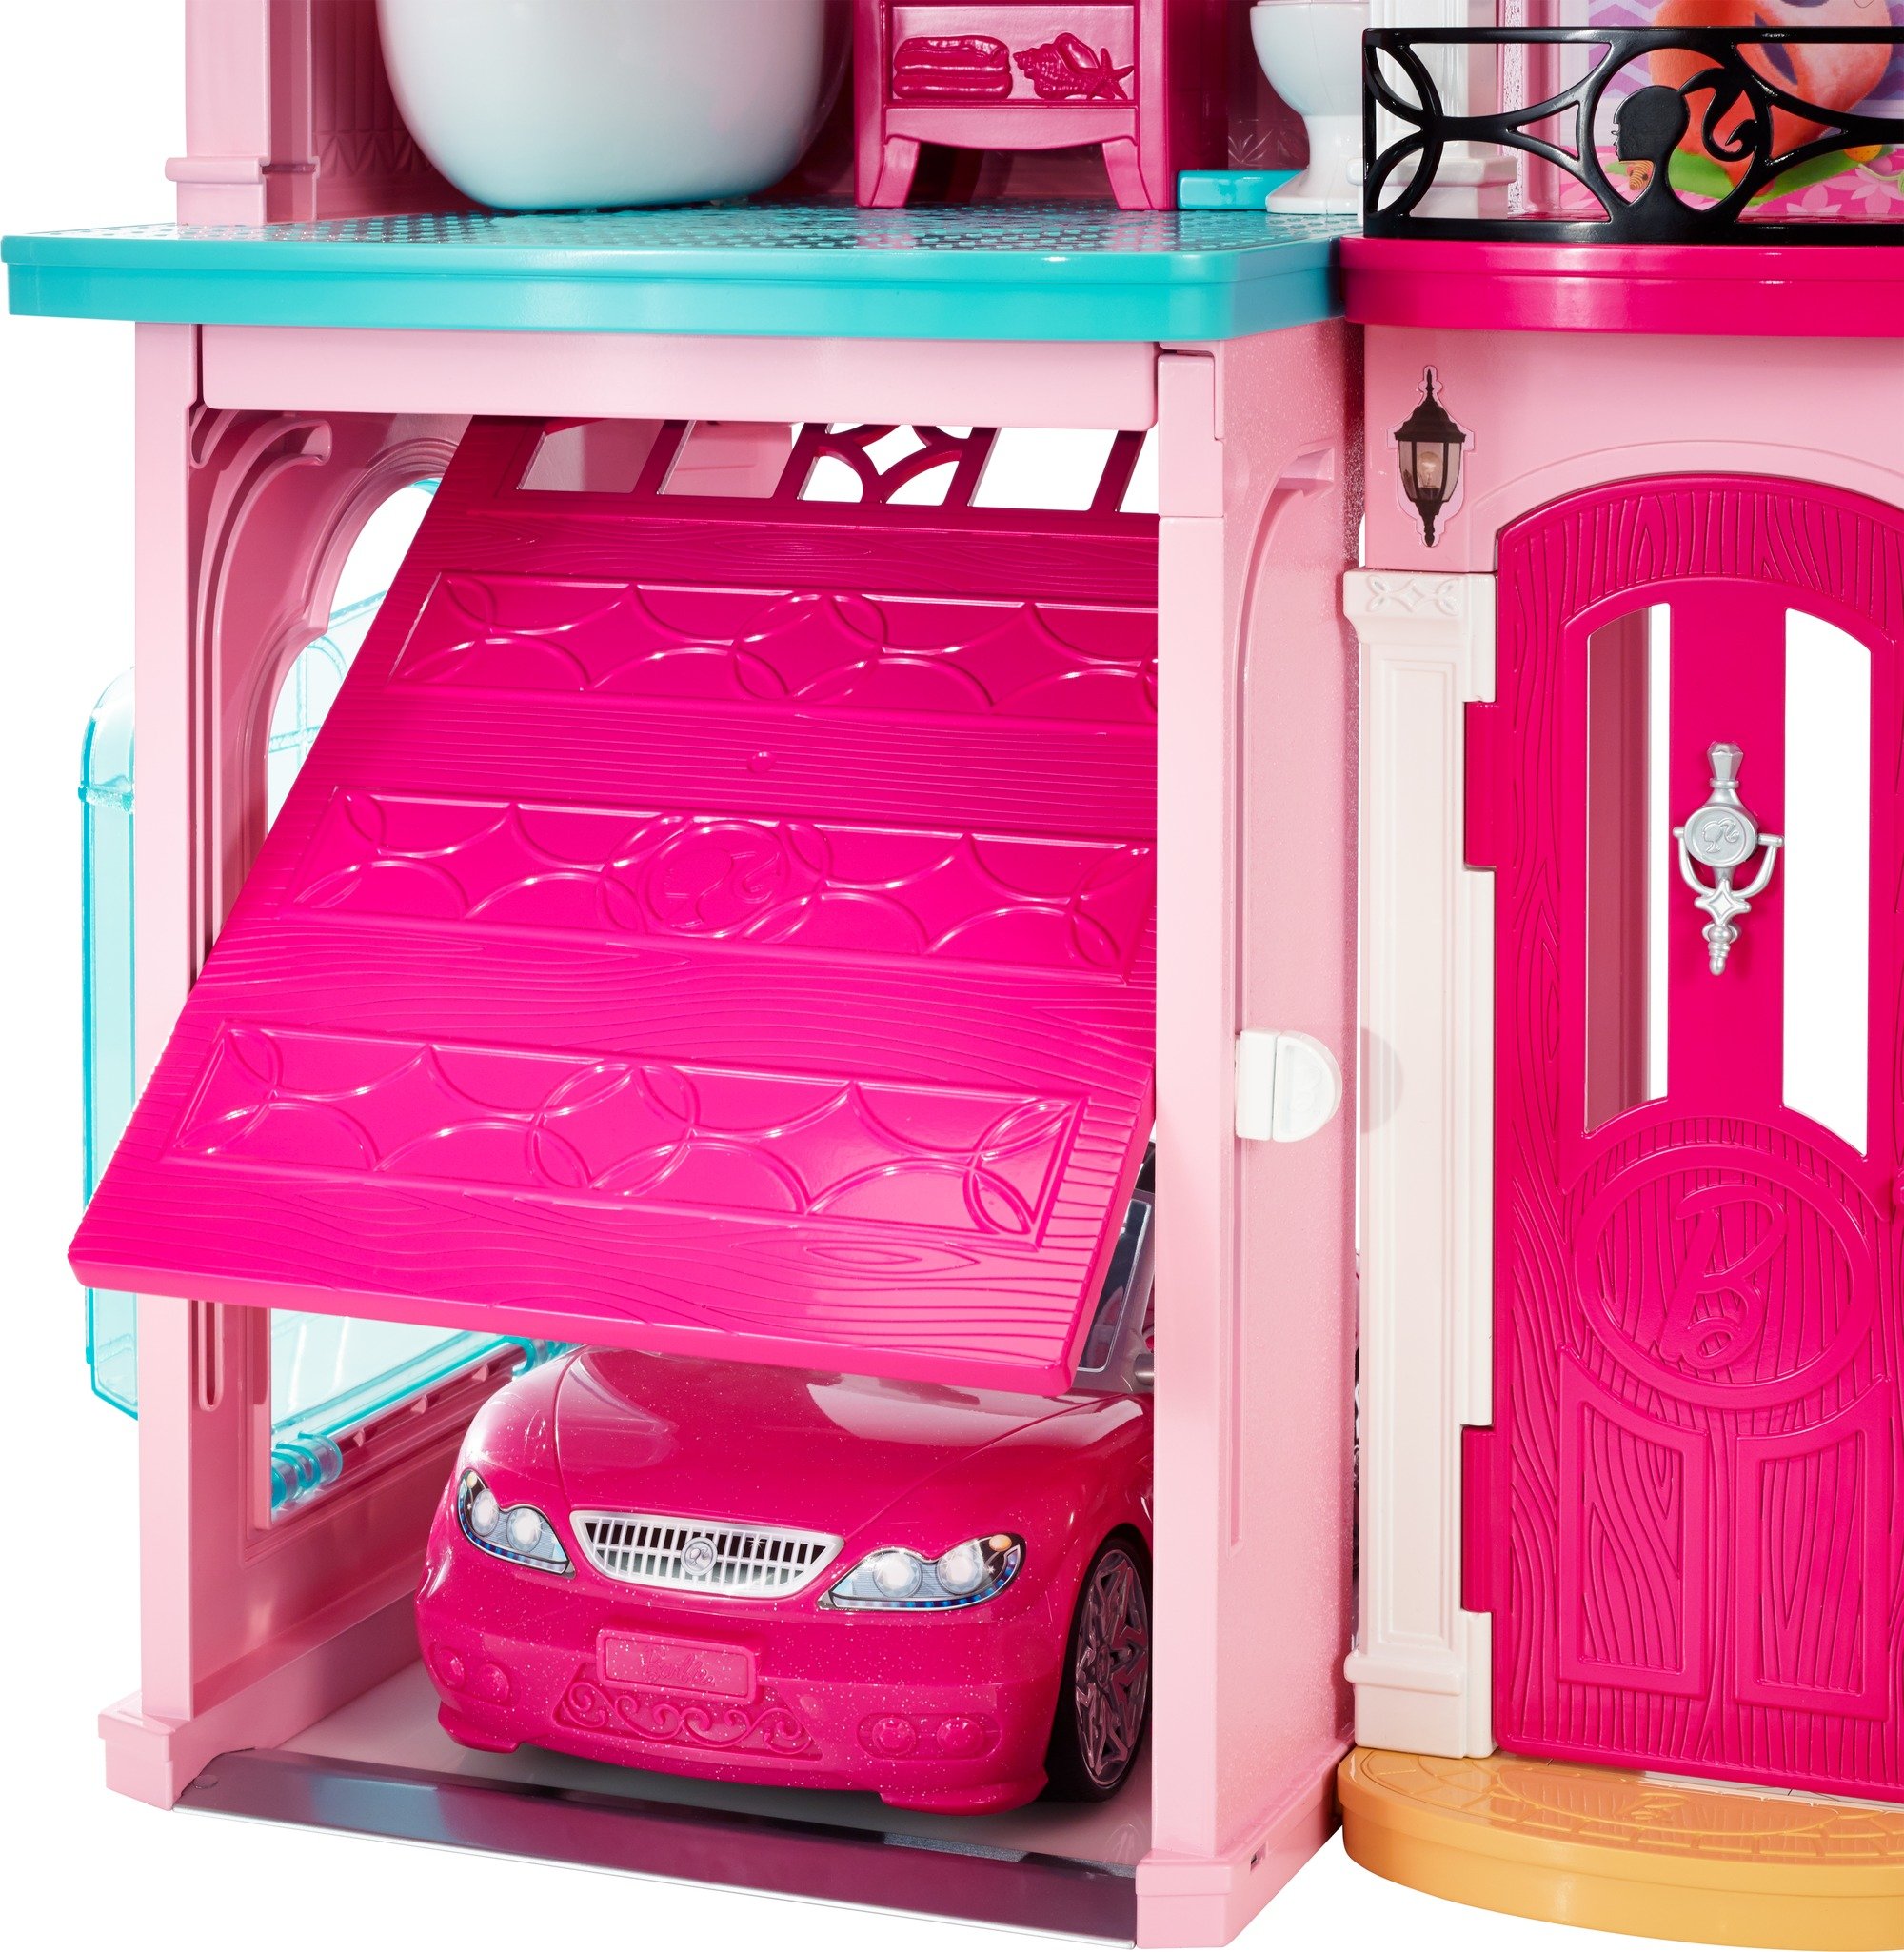 Barbie Dreamhouse With doll For Ages 3 years and up